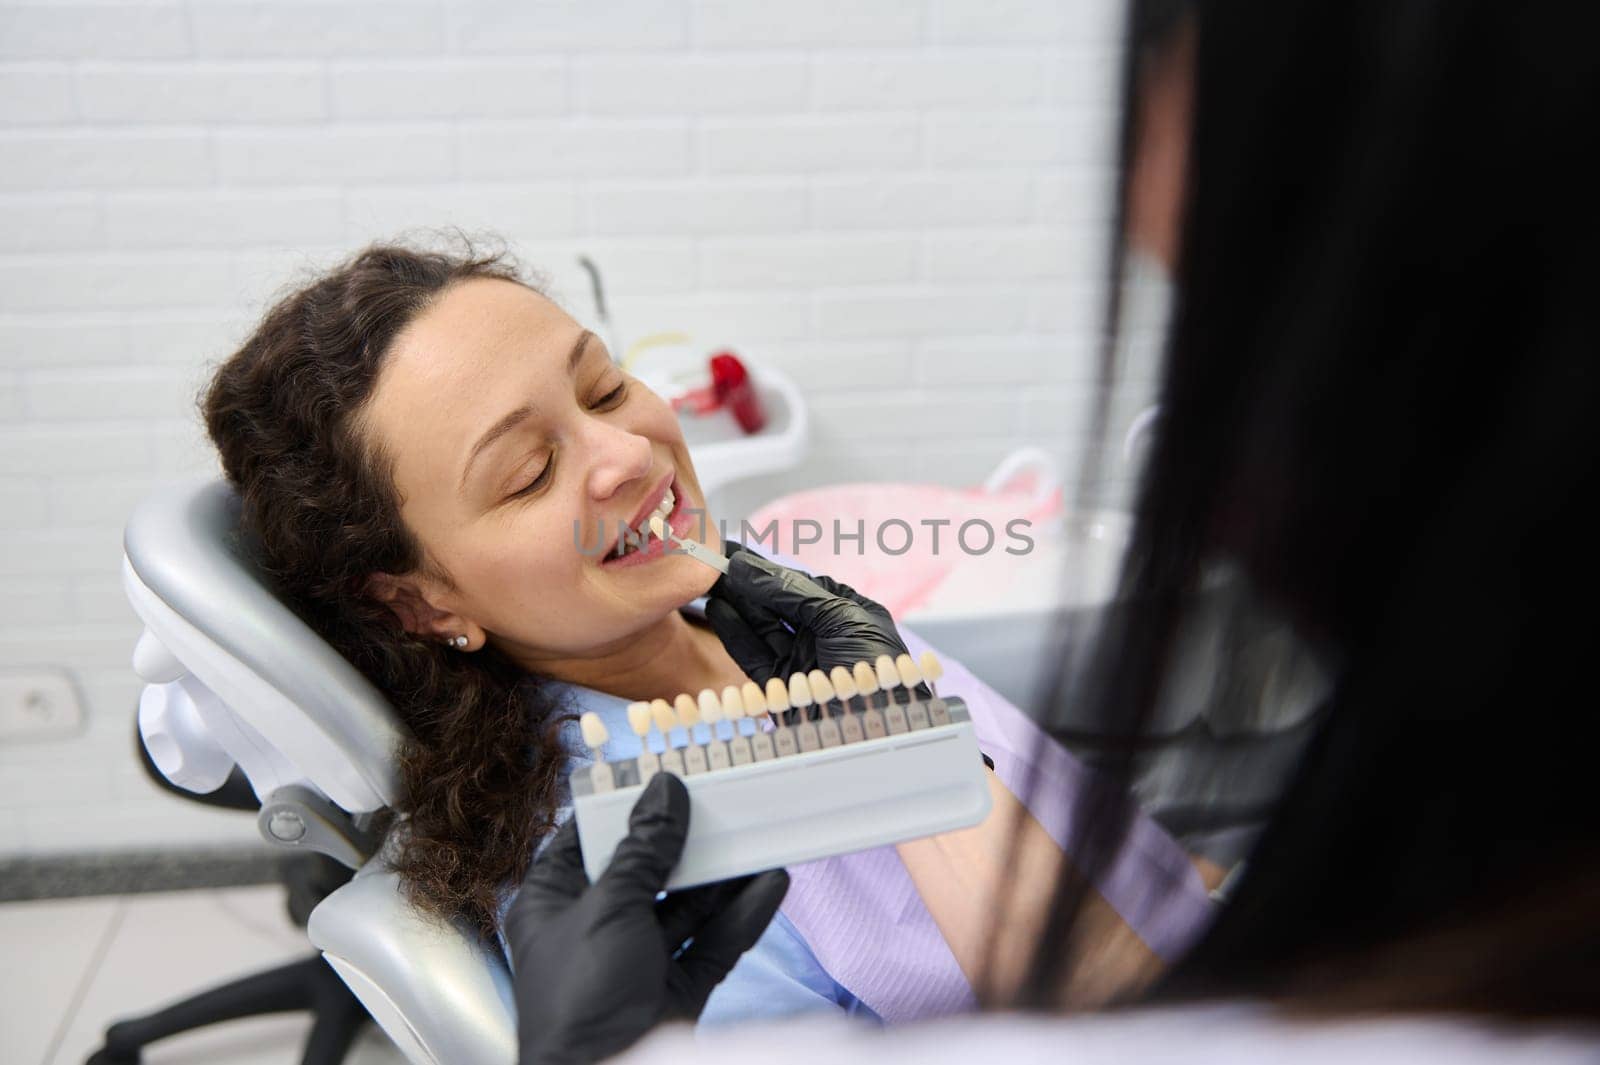 Dentist doctor placing tooth color chart, over a beautiful smiling woman's teeth, choosing the shade of veneers, according to Vita scale. Visual method of tooth color subjective perception. Dentistry